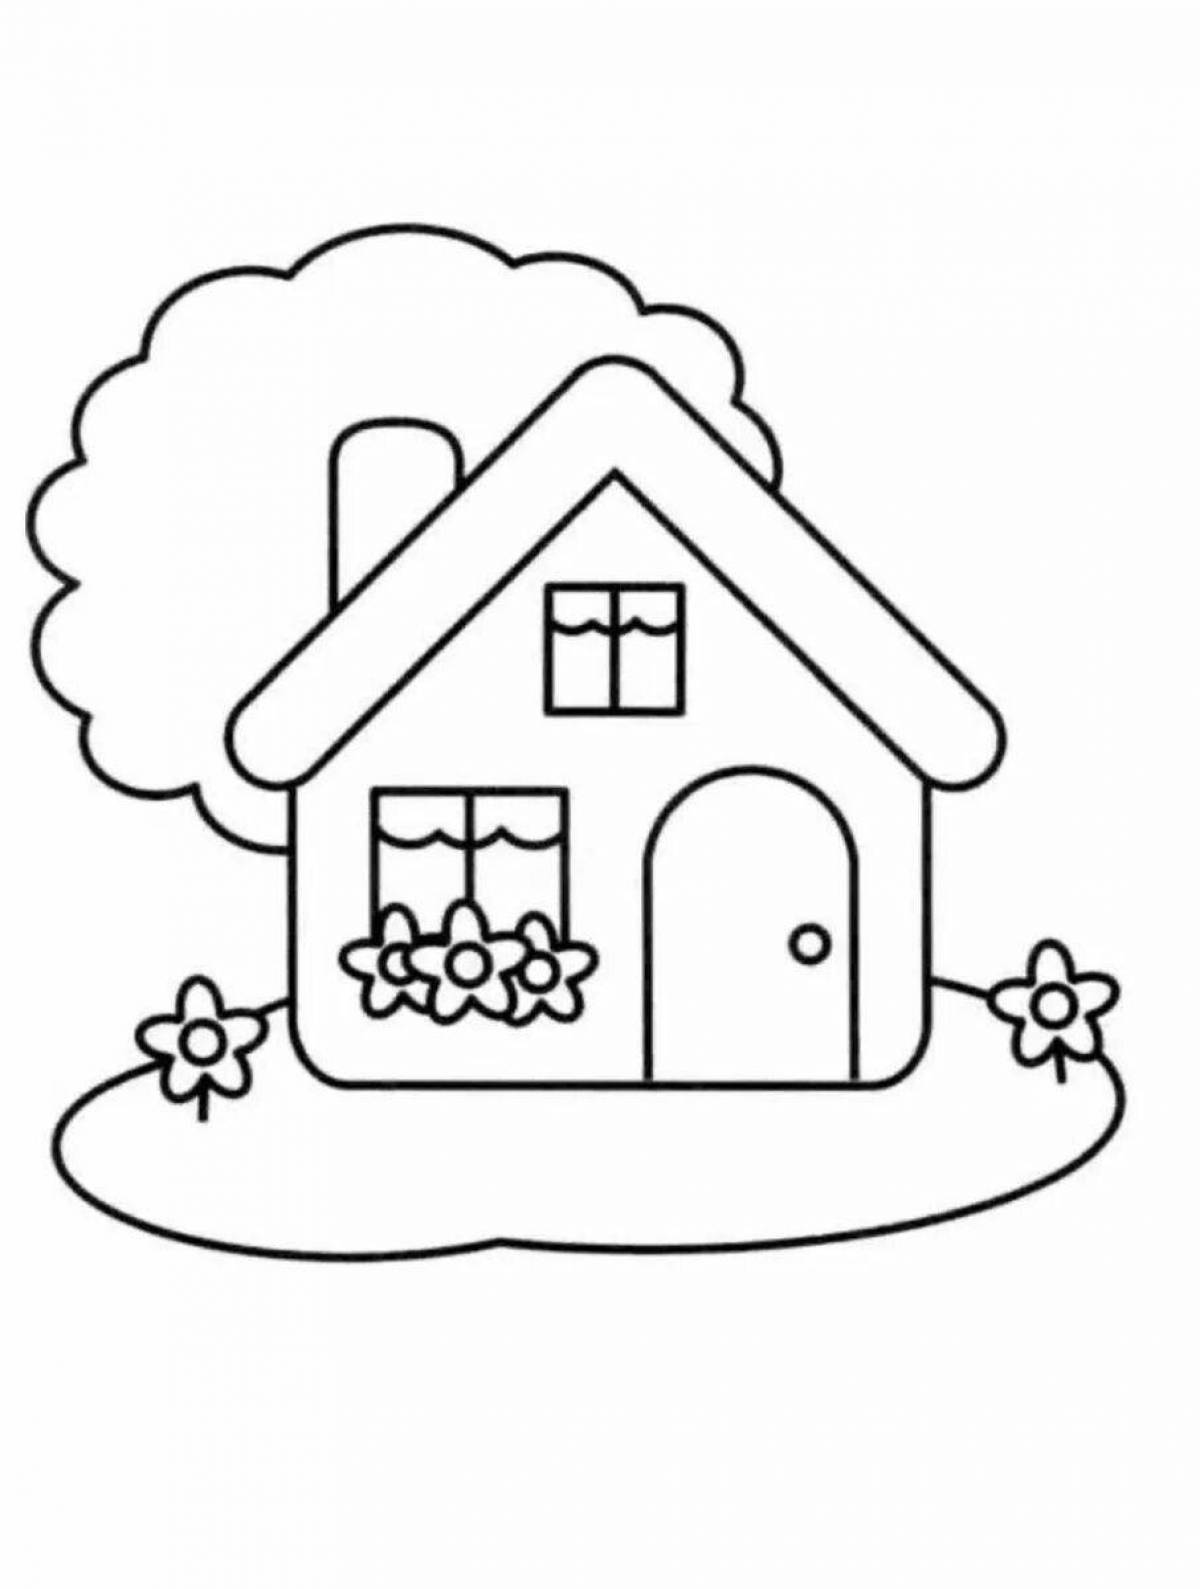 Coloring book shiny simple house